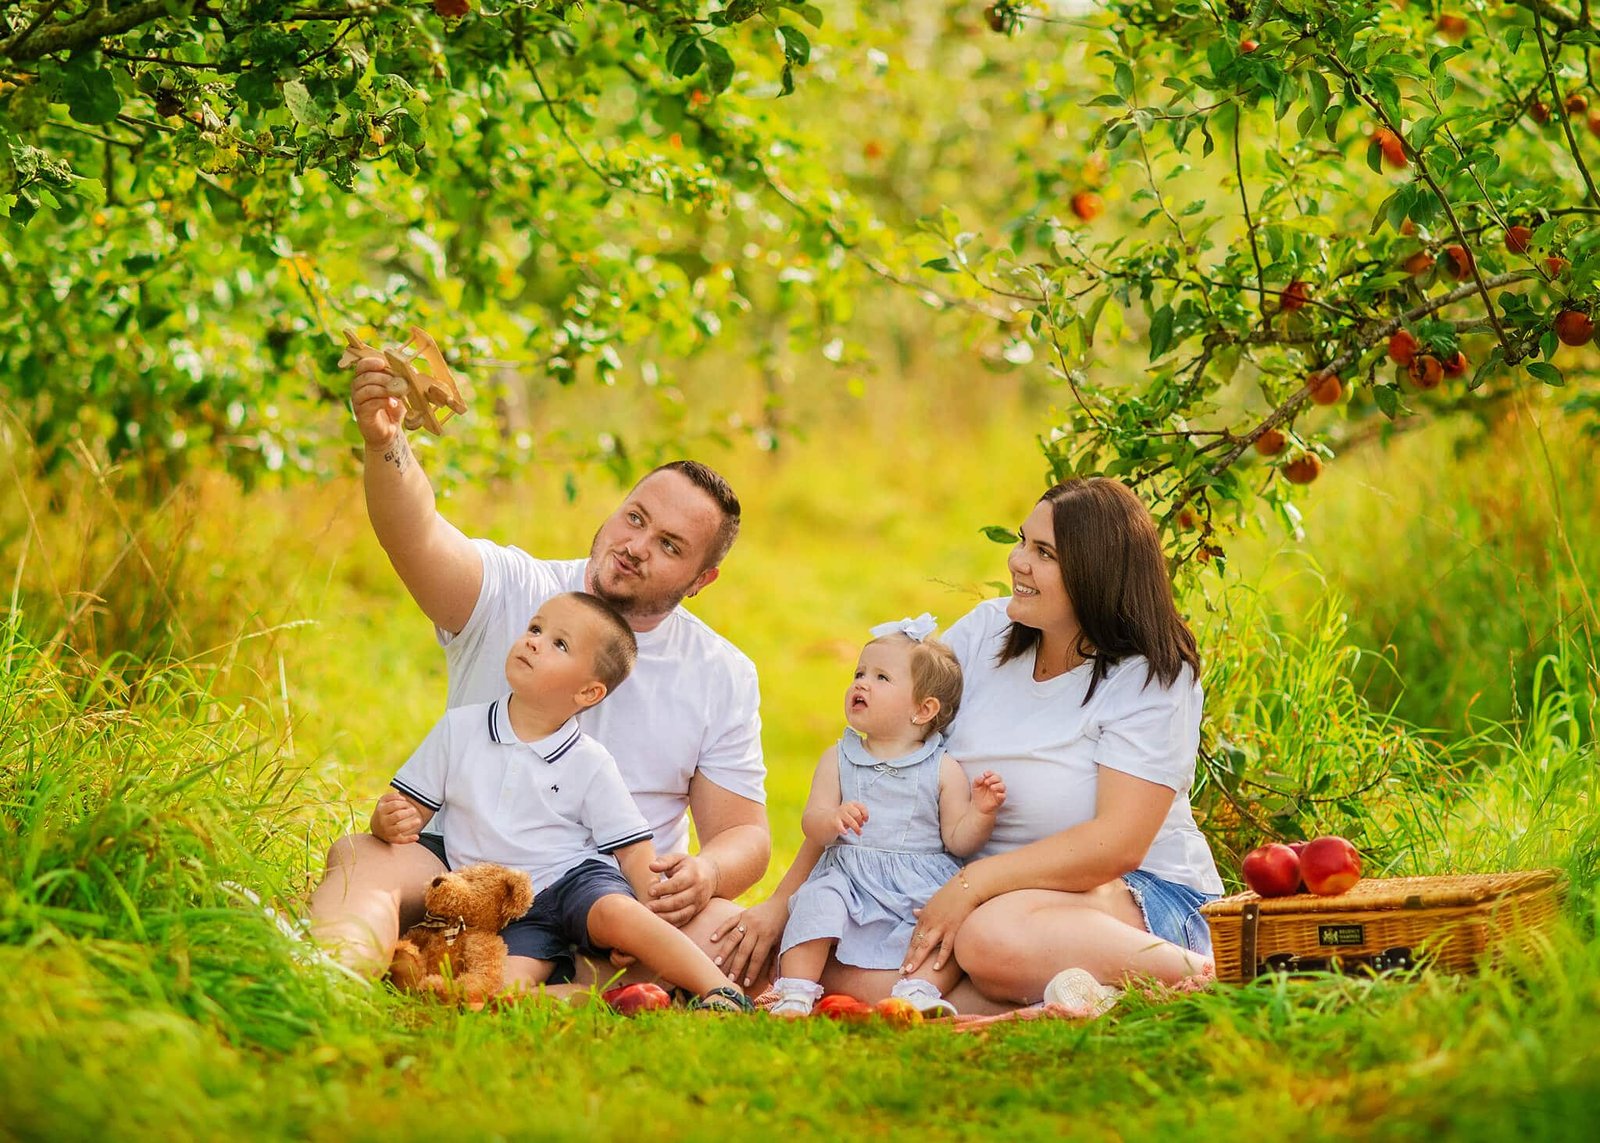 Family enjoying a picnic under apple trees, captured by a leading family photographer in Eastwood, Nottingham.